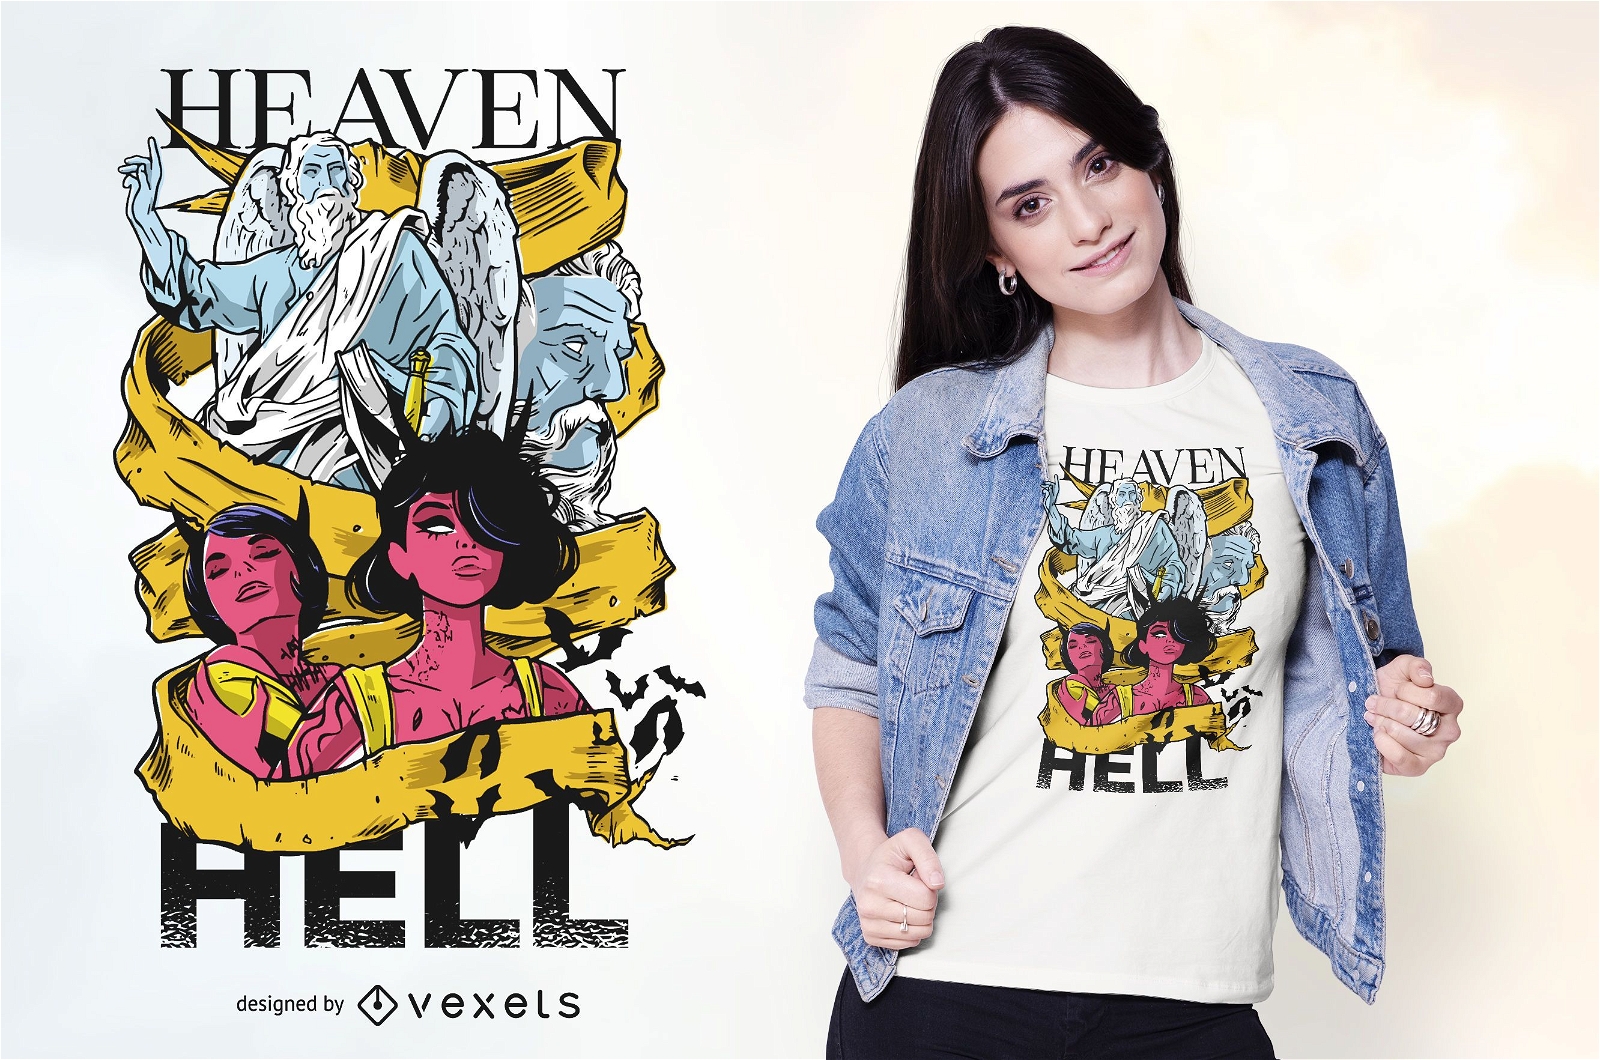 Heaven and hell t-shirt design